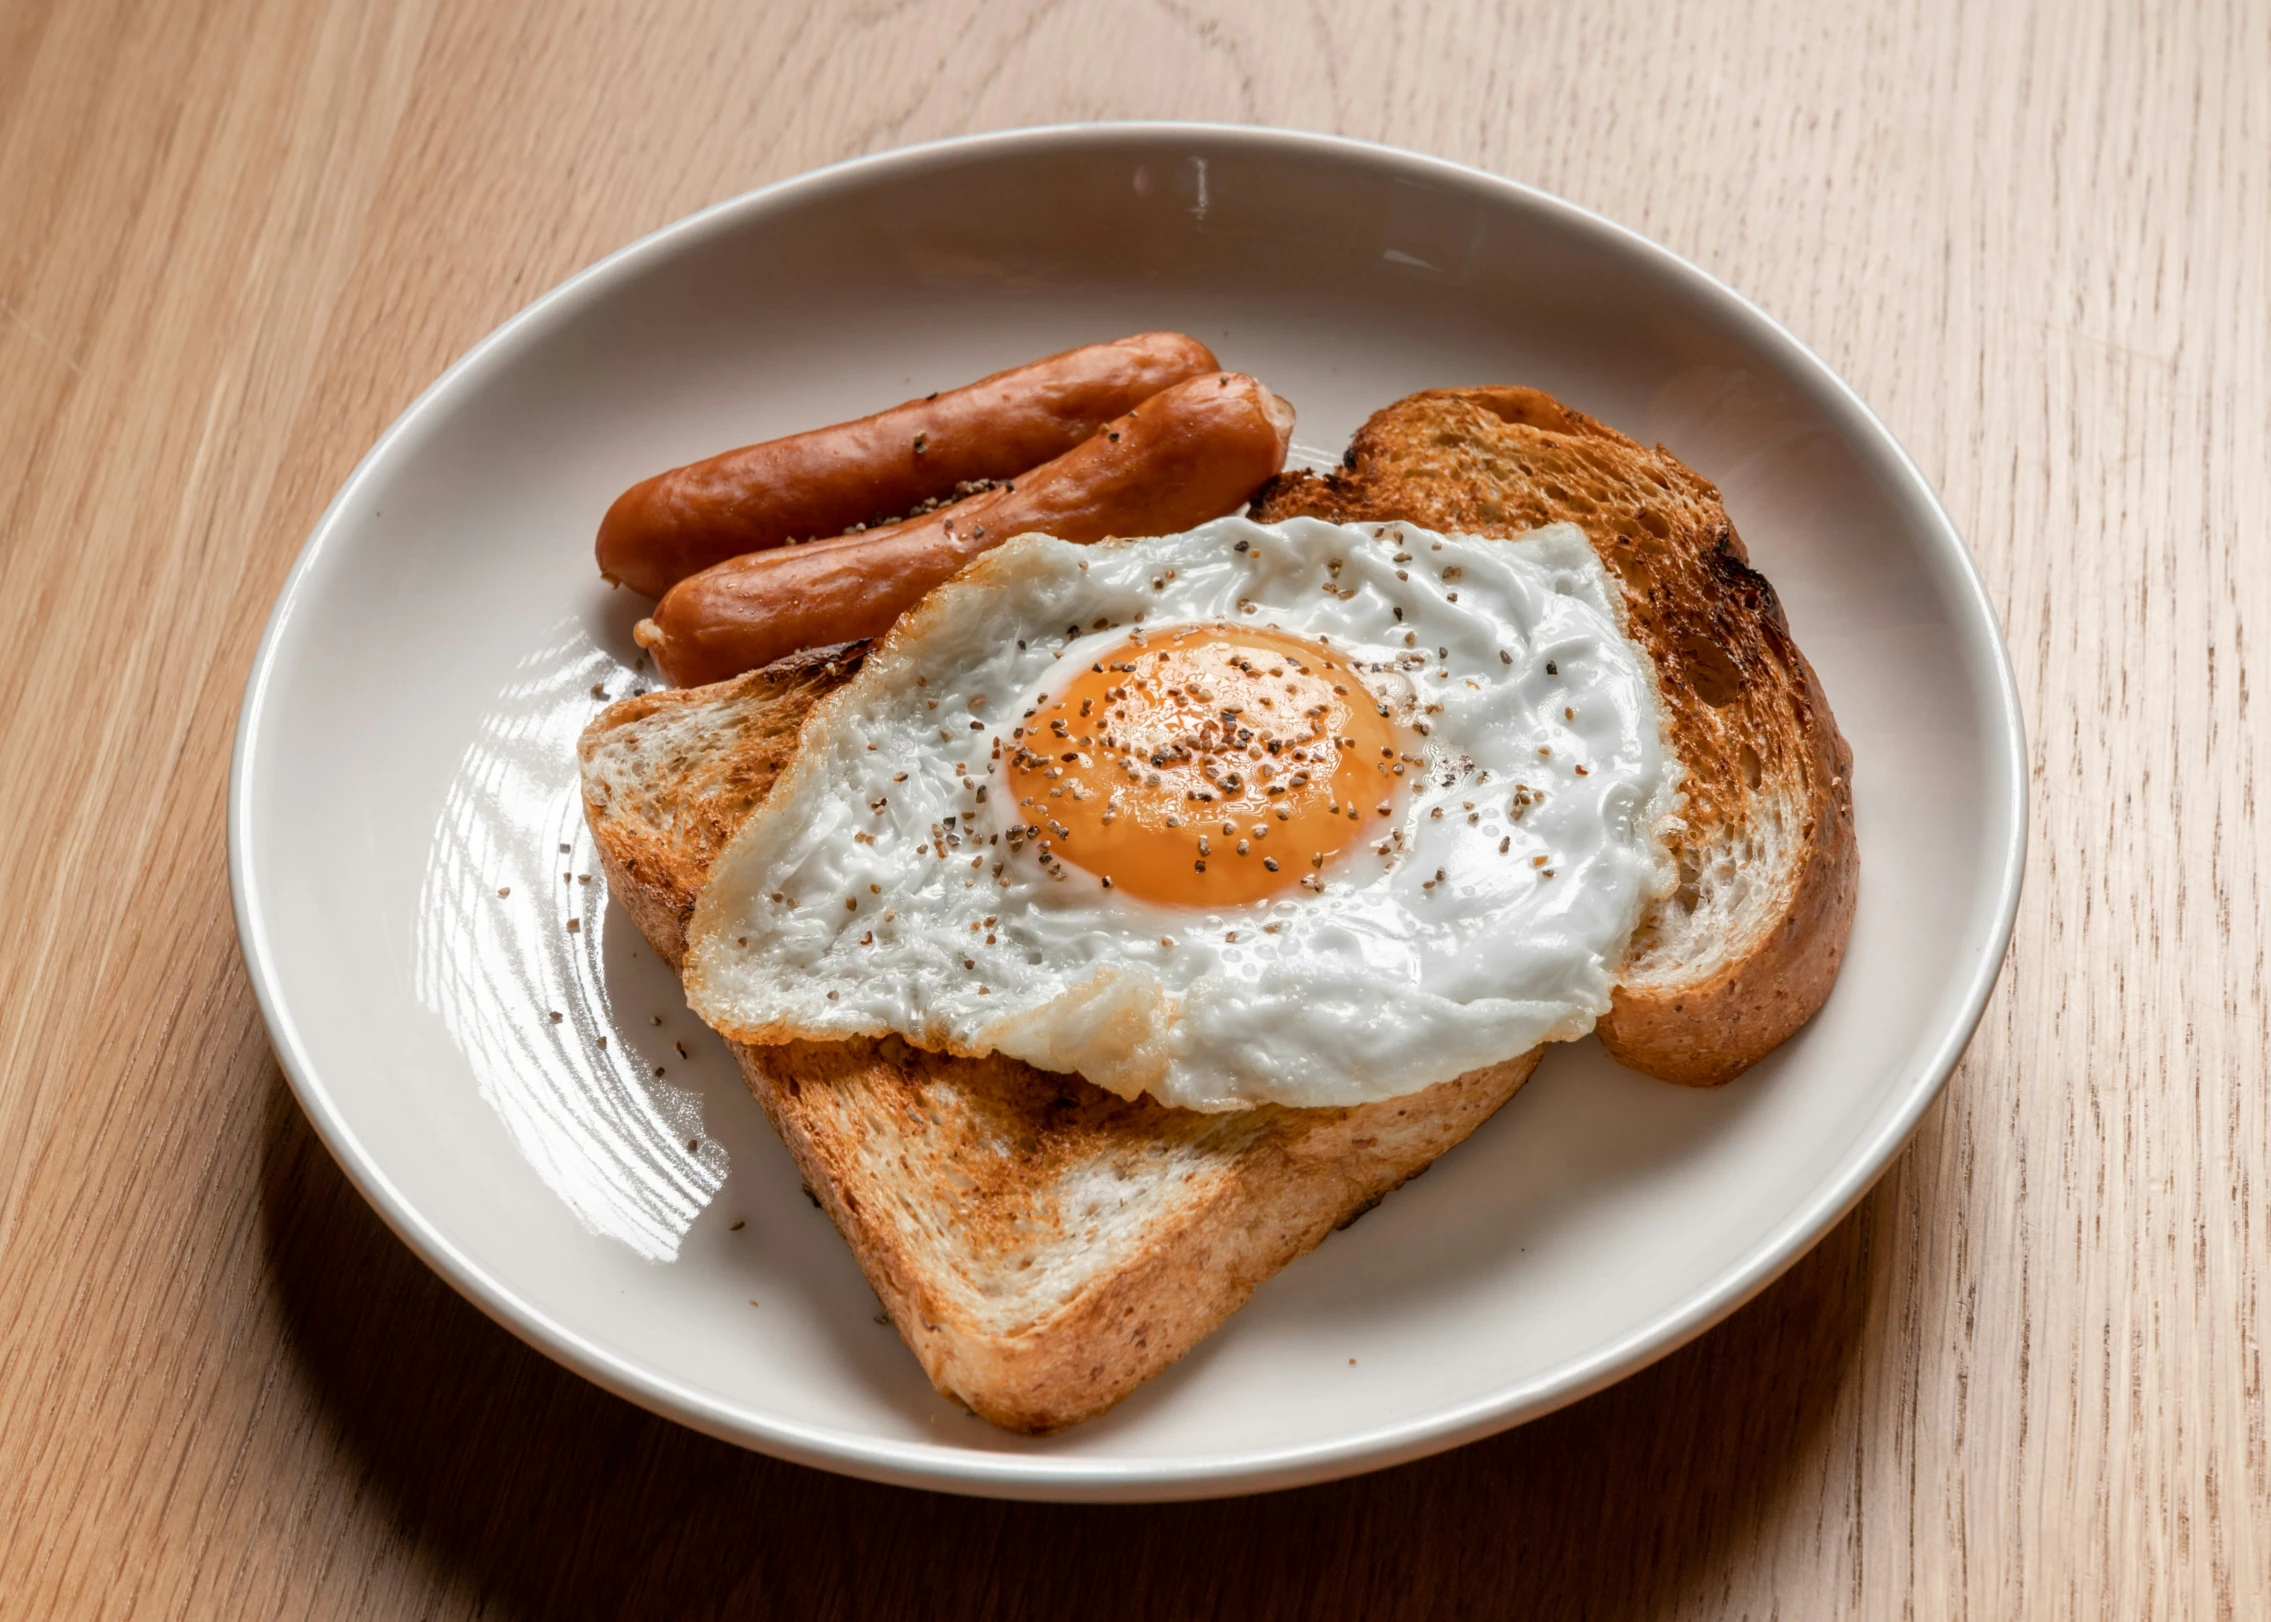 a plate of food containing bread, eggs and sausage